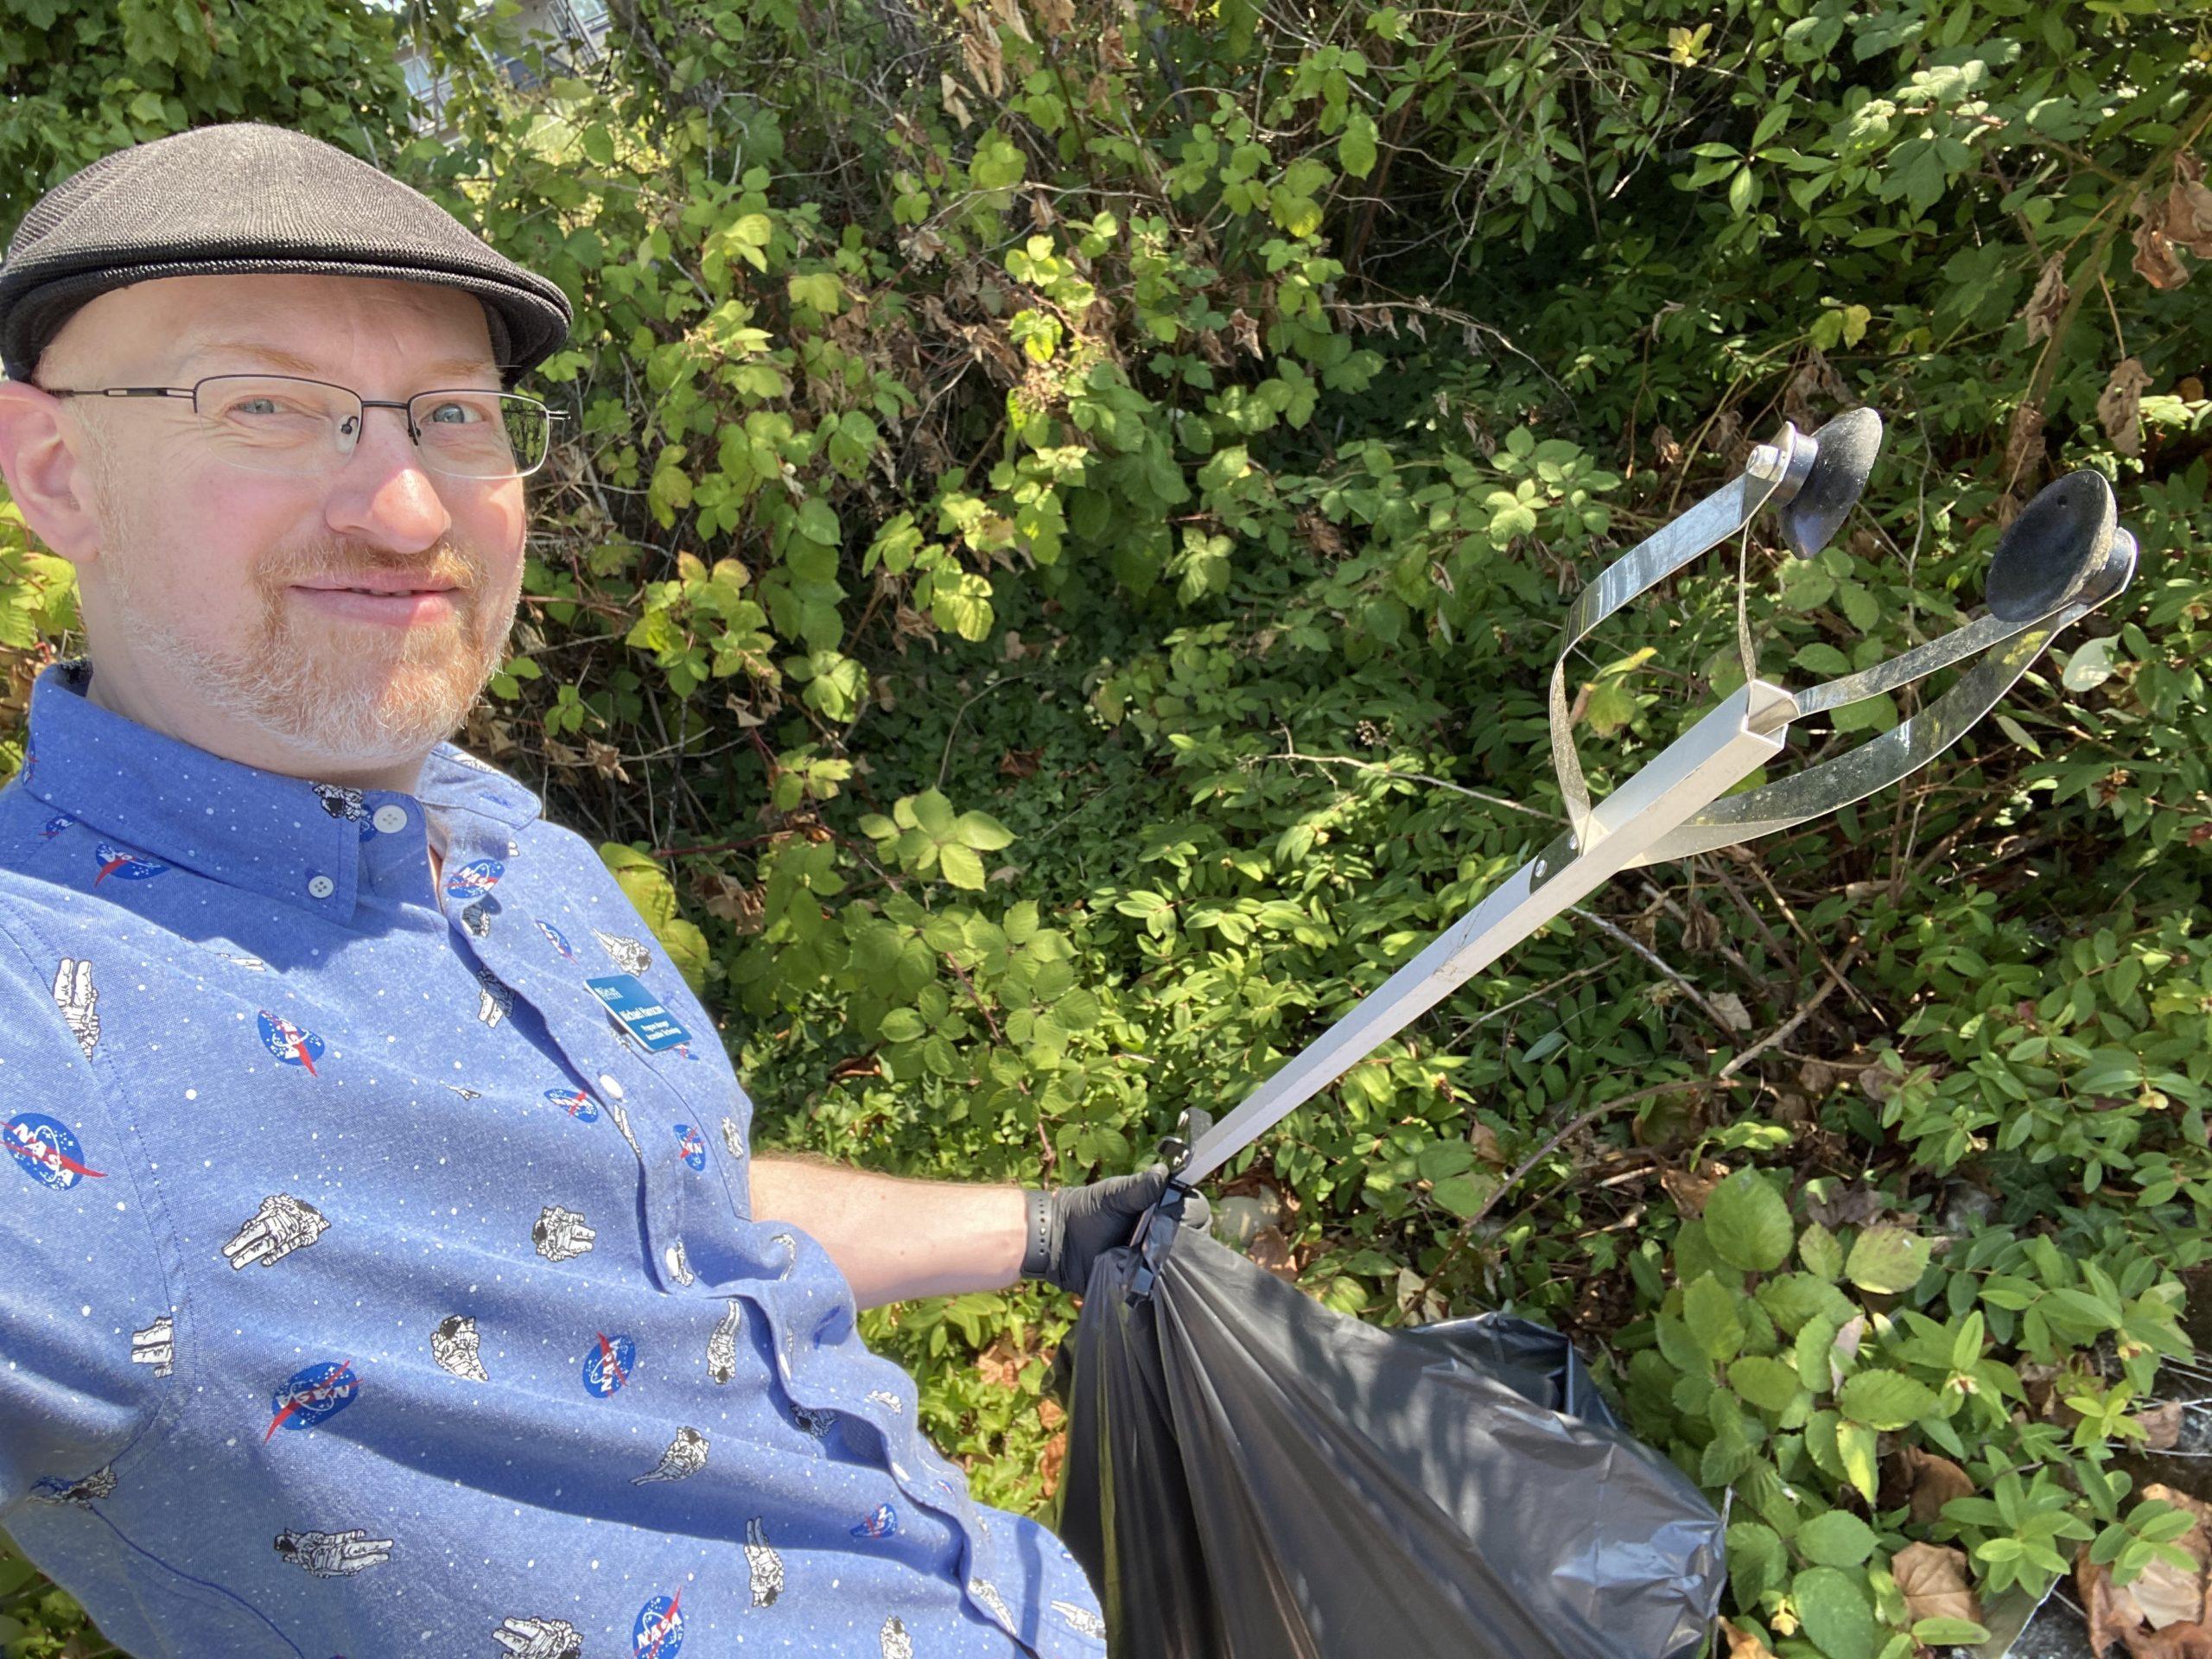 Me standing in front of some bushes and ivy, holding a full trashbag and a 'grabber' used for picking up trash.